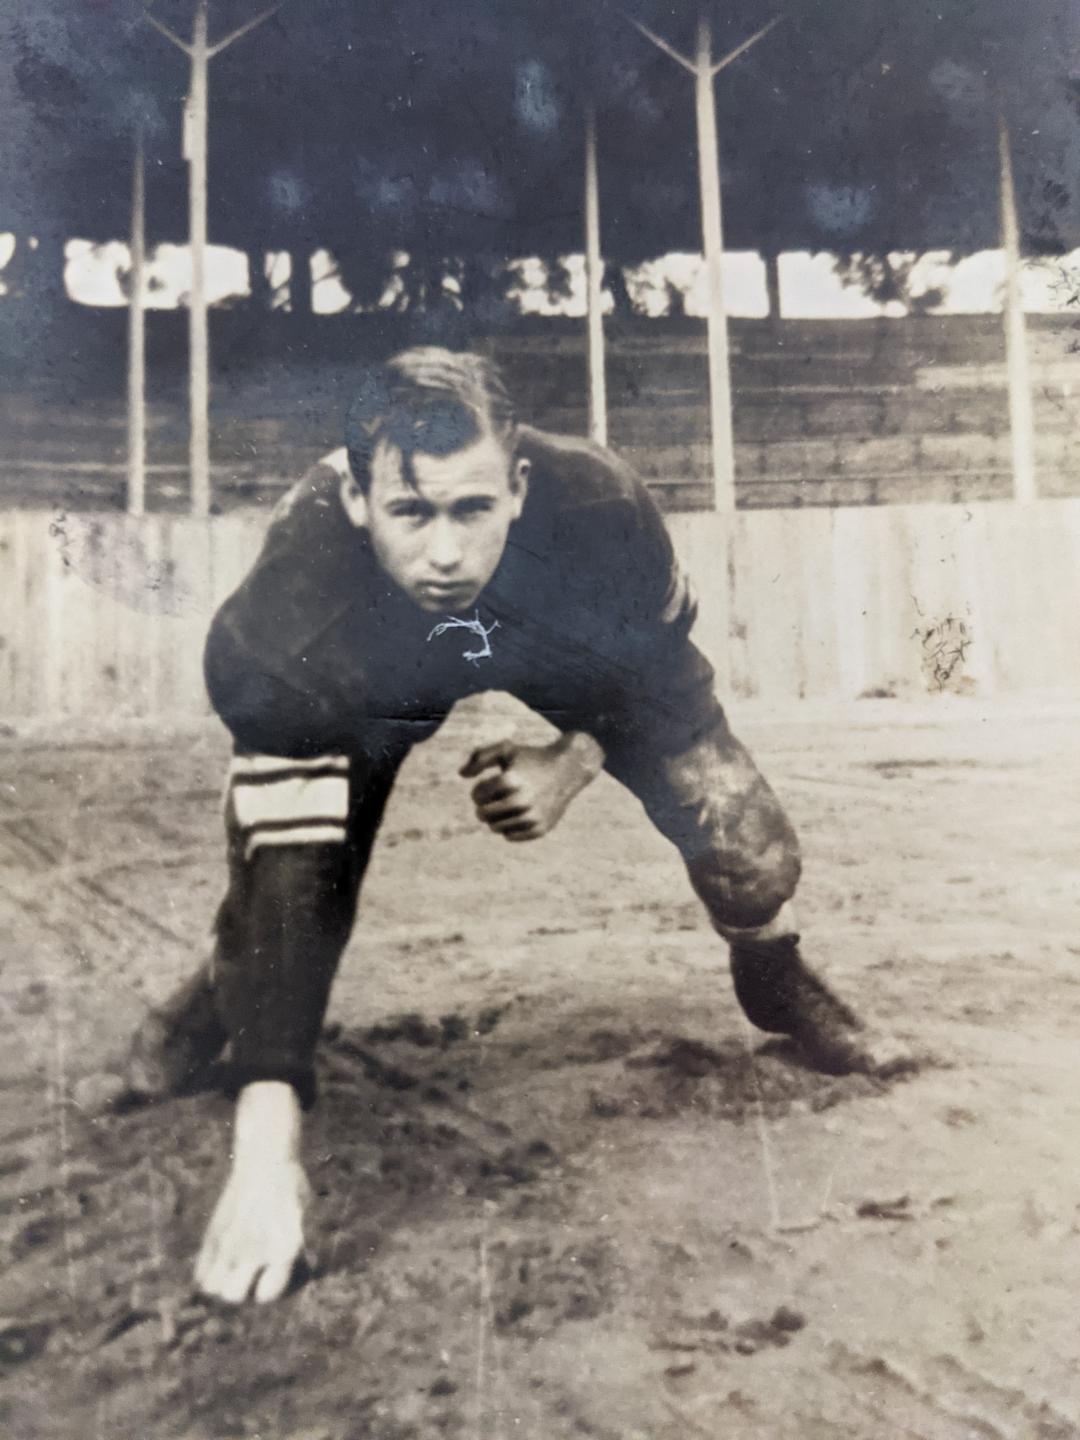 Gene Spears played football at Lakeview High School and was captain of the 1948 All-Conference team.